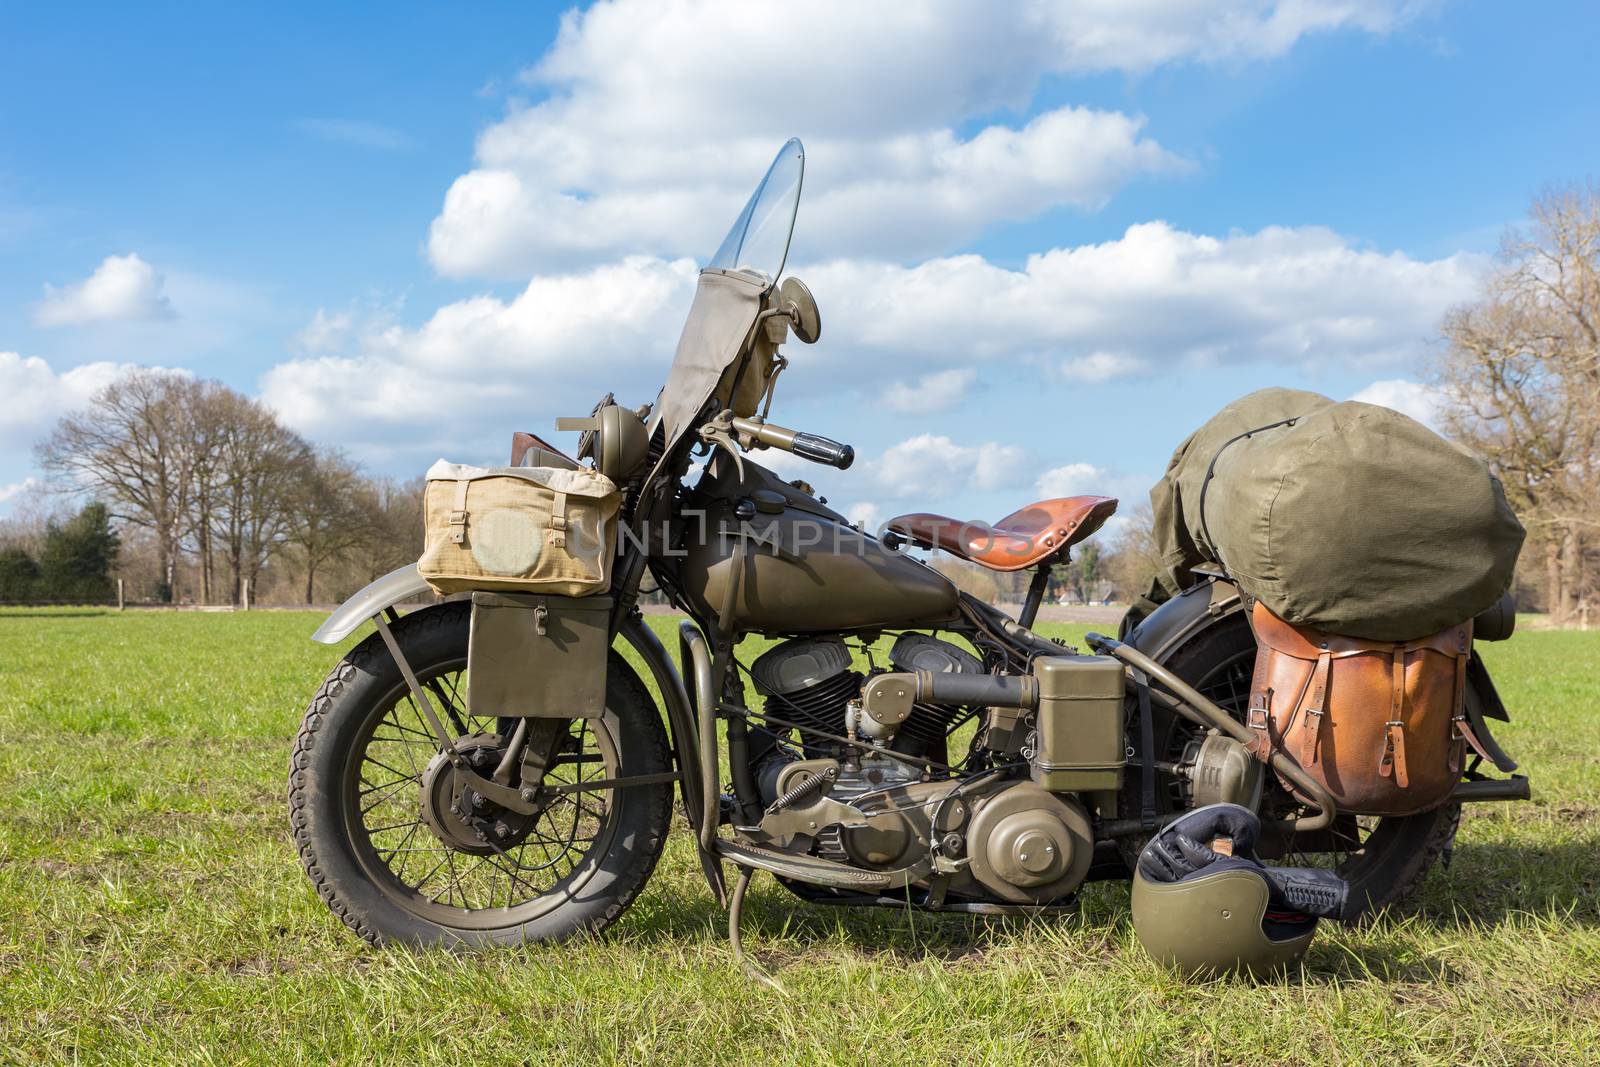 Old american military motorcycle parked on grass by BenSchonewille